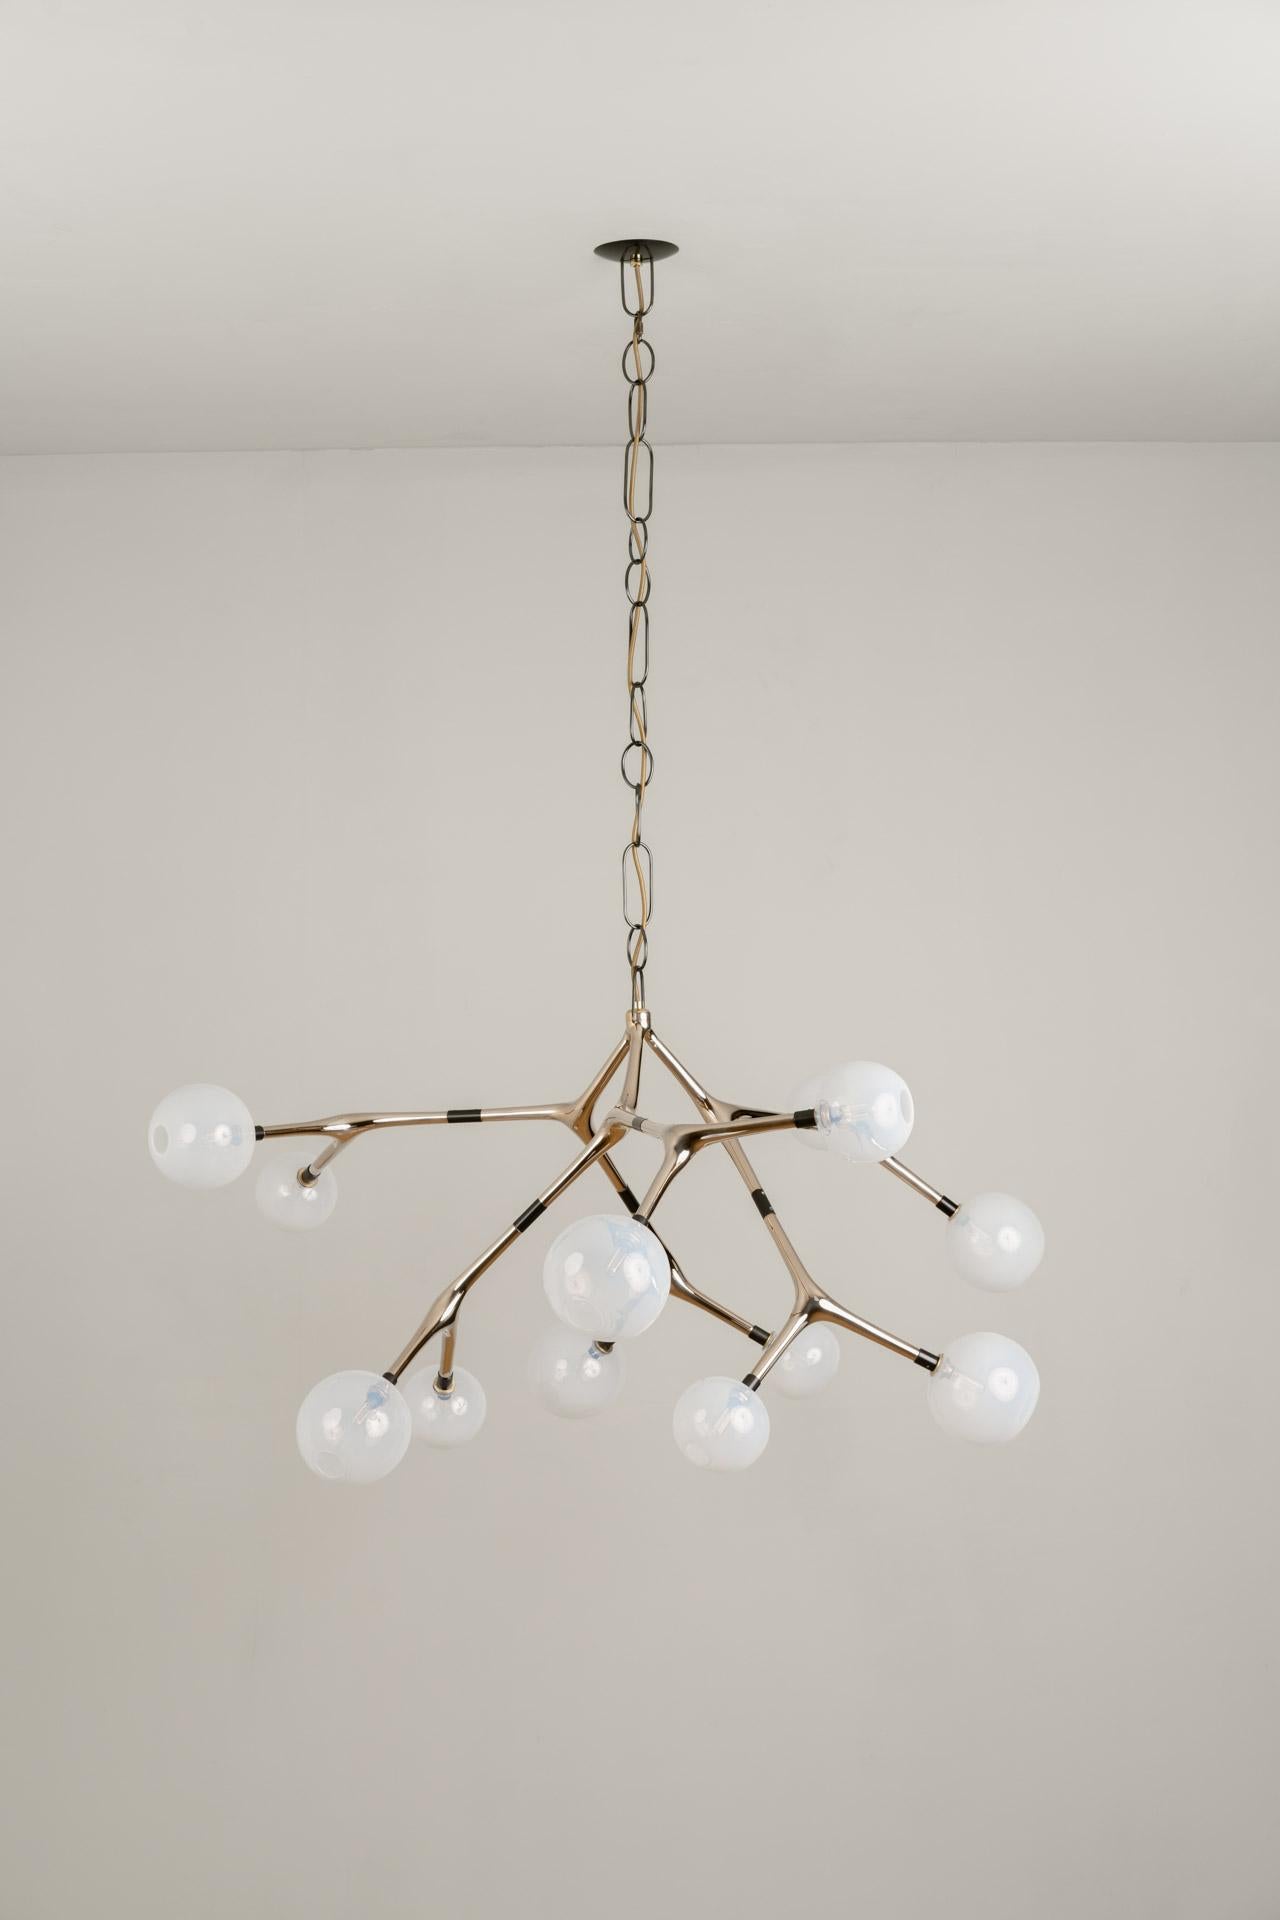 MARATUS chandelier was designed for the Mol collection by Mexican artist Isabel Moncada.

Maratus gets its name from a spider that displays an extravagant peacock-like tail to hypnotize prey with its mesmerizing pattern. In a subtly disorganized